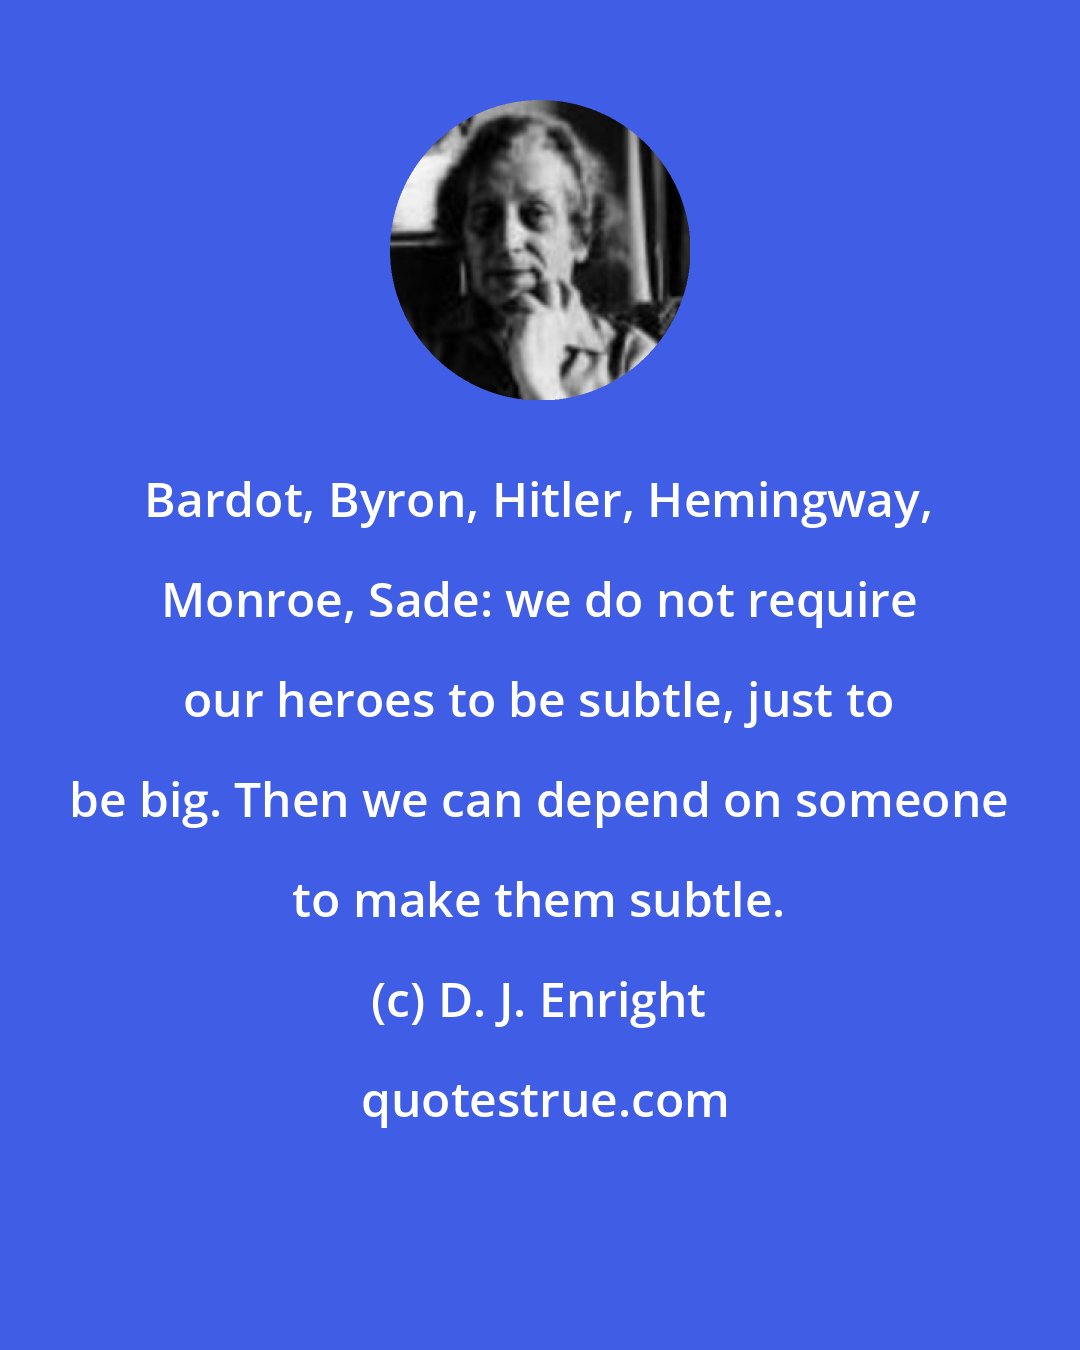 D. J. Enright: Bardot, Byron, Hitler, Hemingway, Monroe, Sade: we do not require our heroes to be subtle, just to be big. Then we can depend on someone to make them subtle.